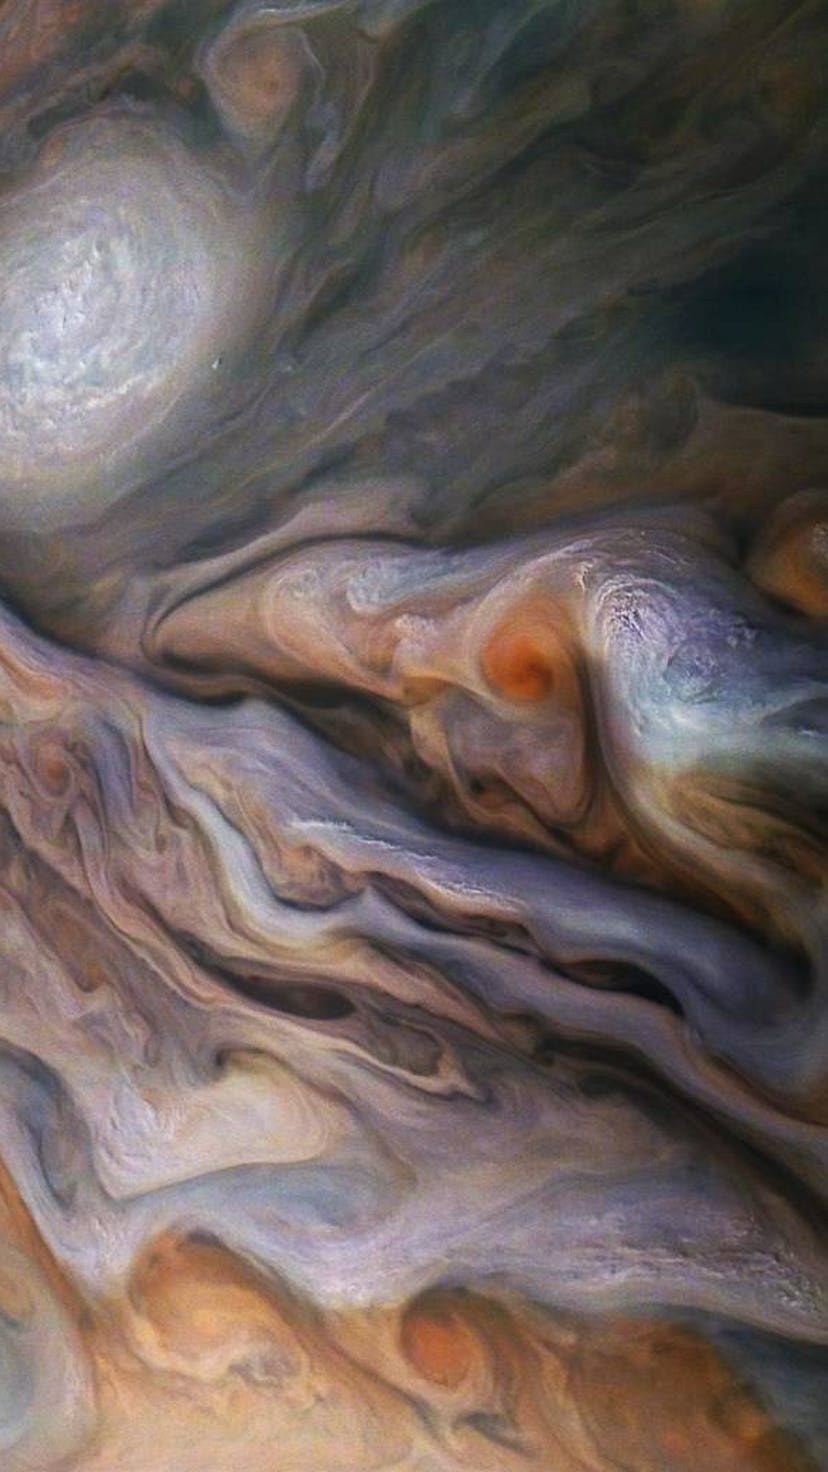 Jupiter. NASA's Juno spacecraft was 4400 miles above the cloud tops when it snapped this picture of swirling clouds.